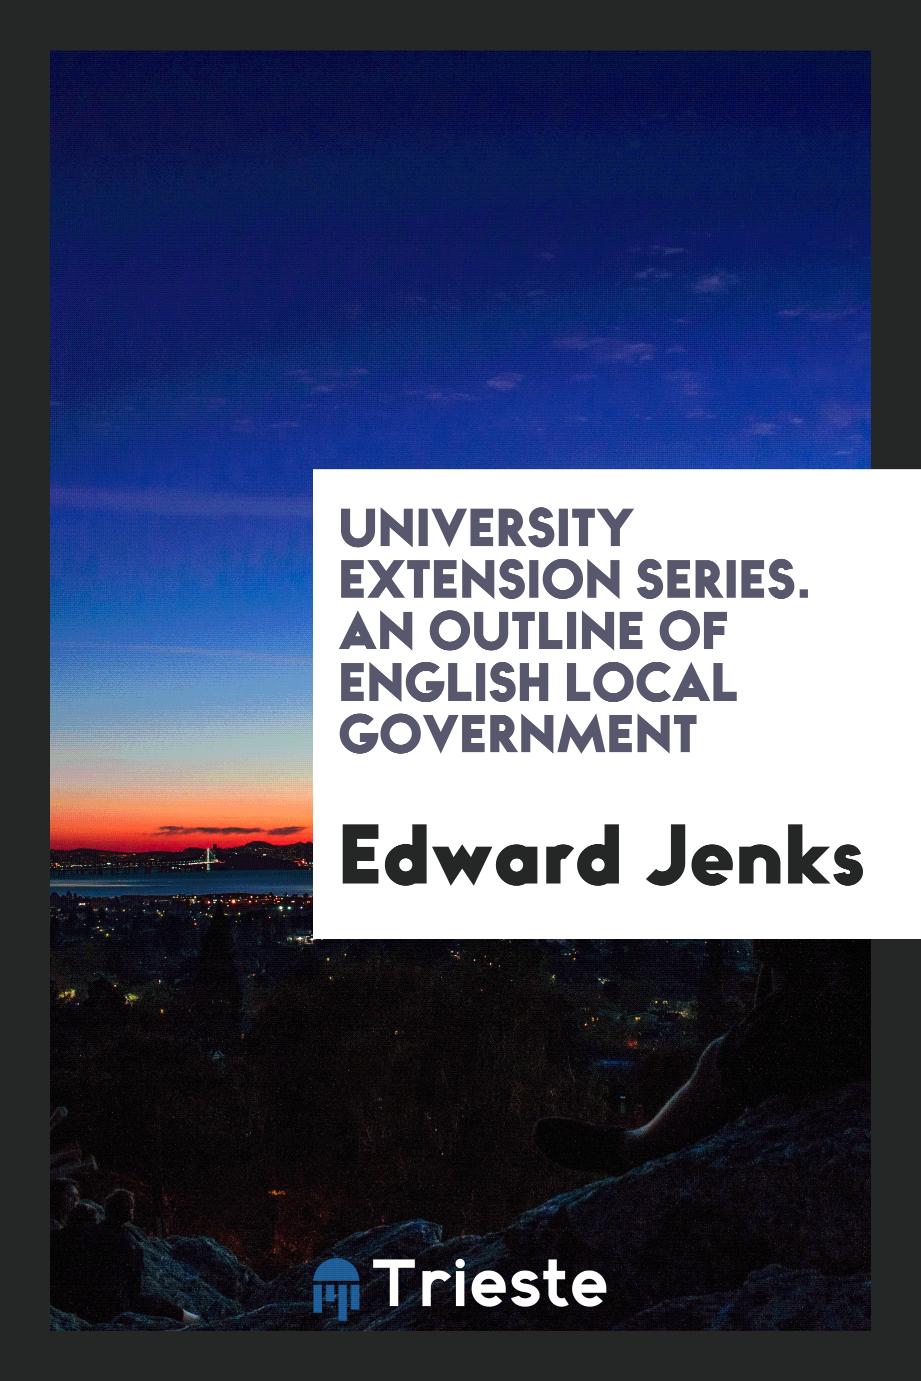 University Extension Series. An Outline of English Local Government